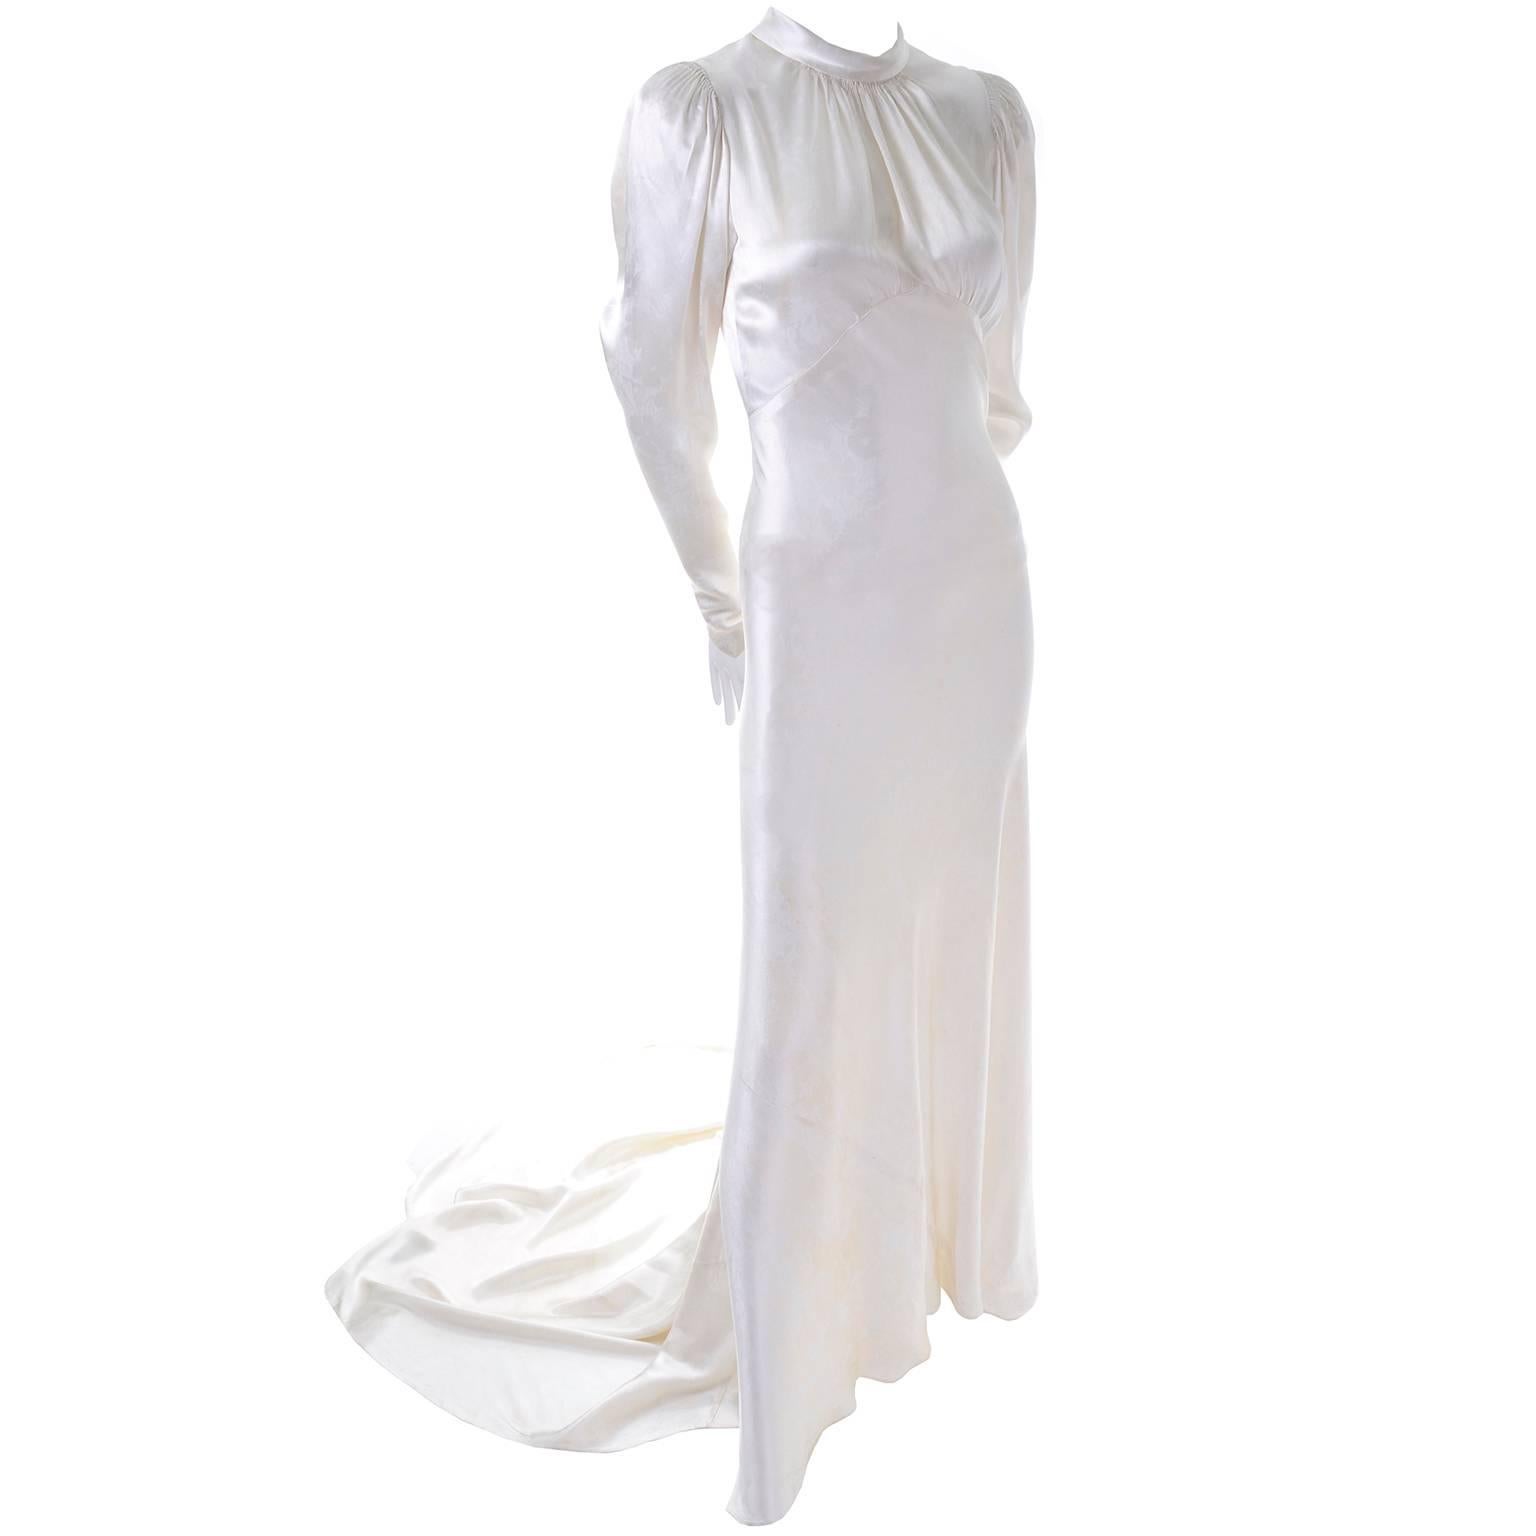 1930s Vintage Ivory Silk Satin Wedding Dress with Train and High Neck